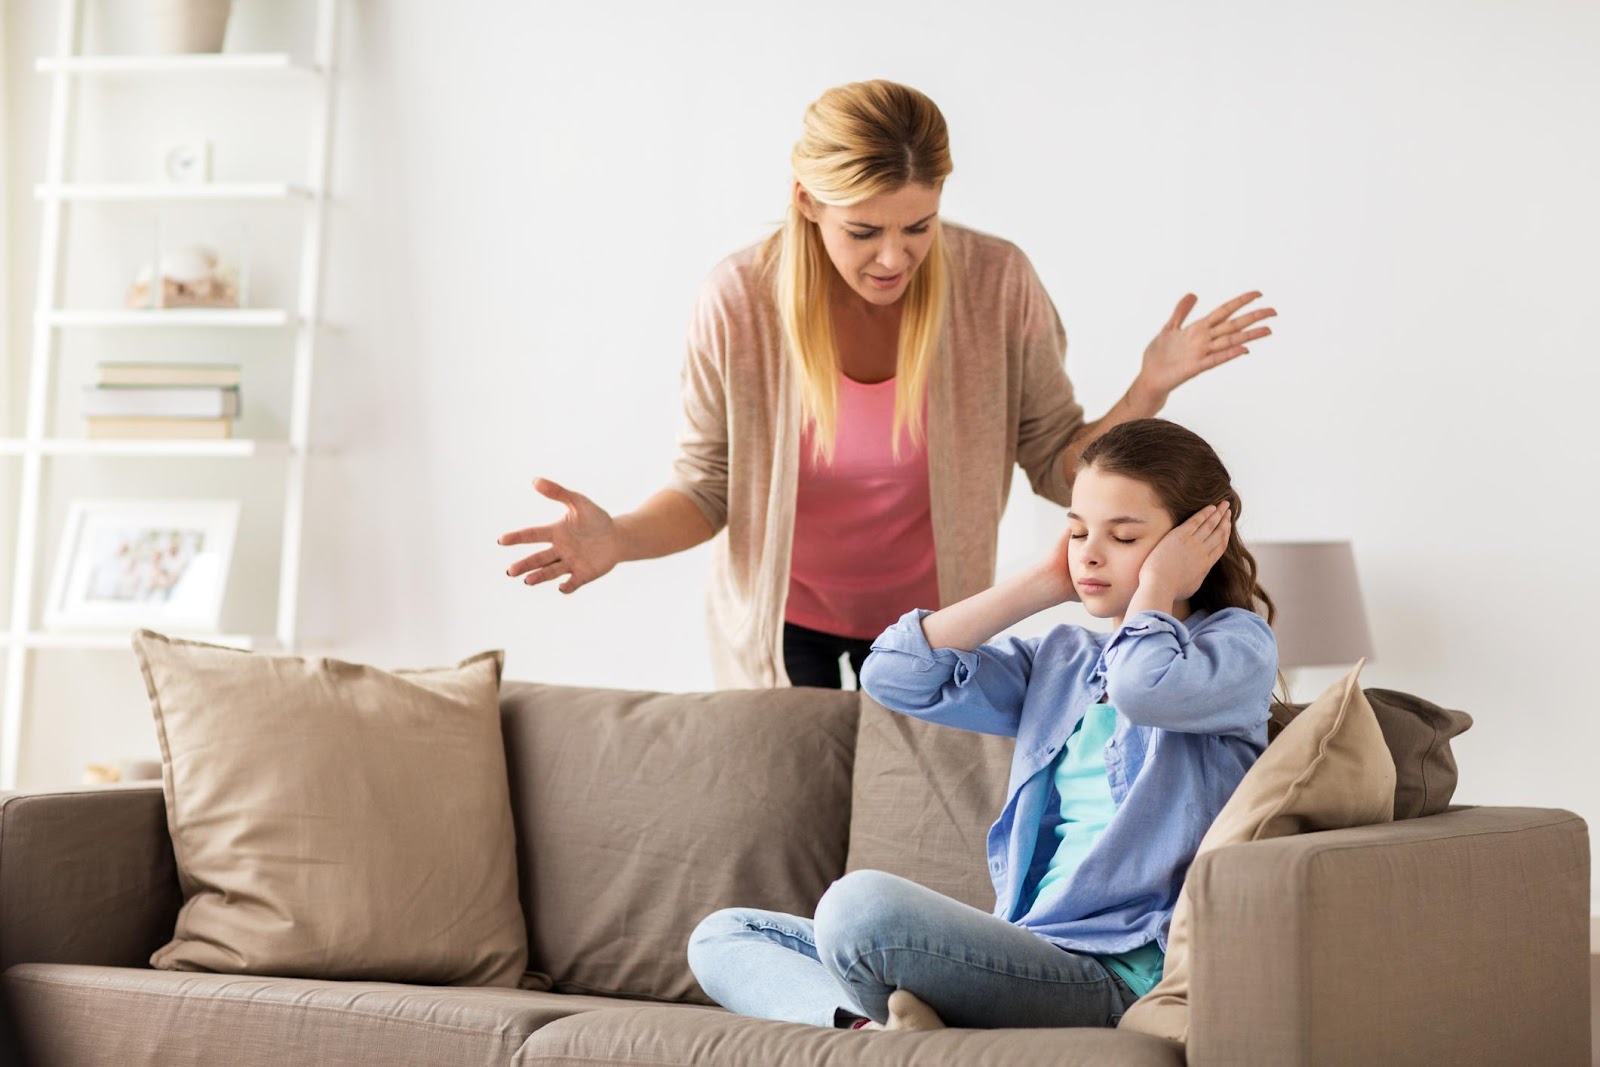 A person and a child on a couch

Description automatically generated with low confidence